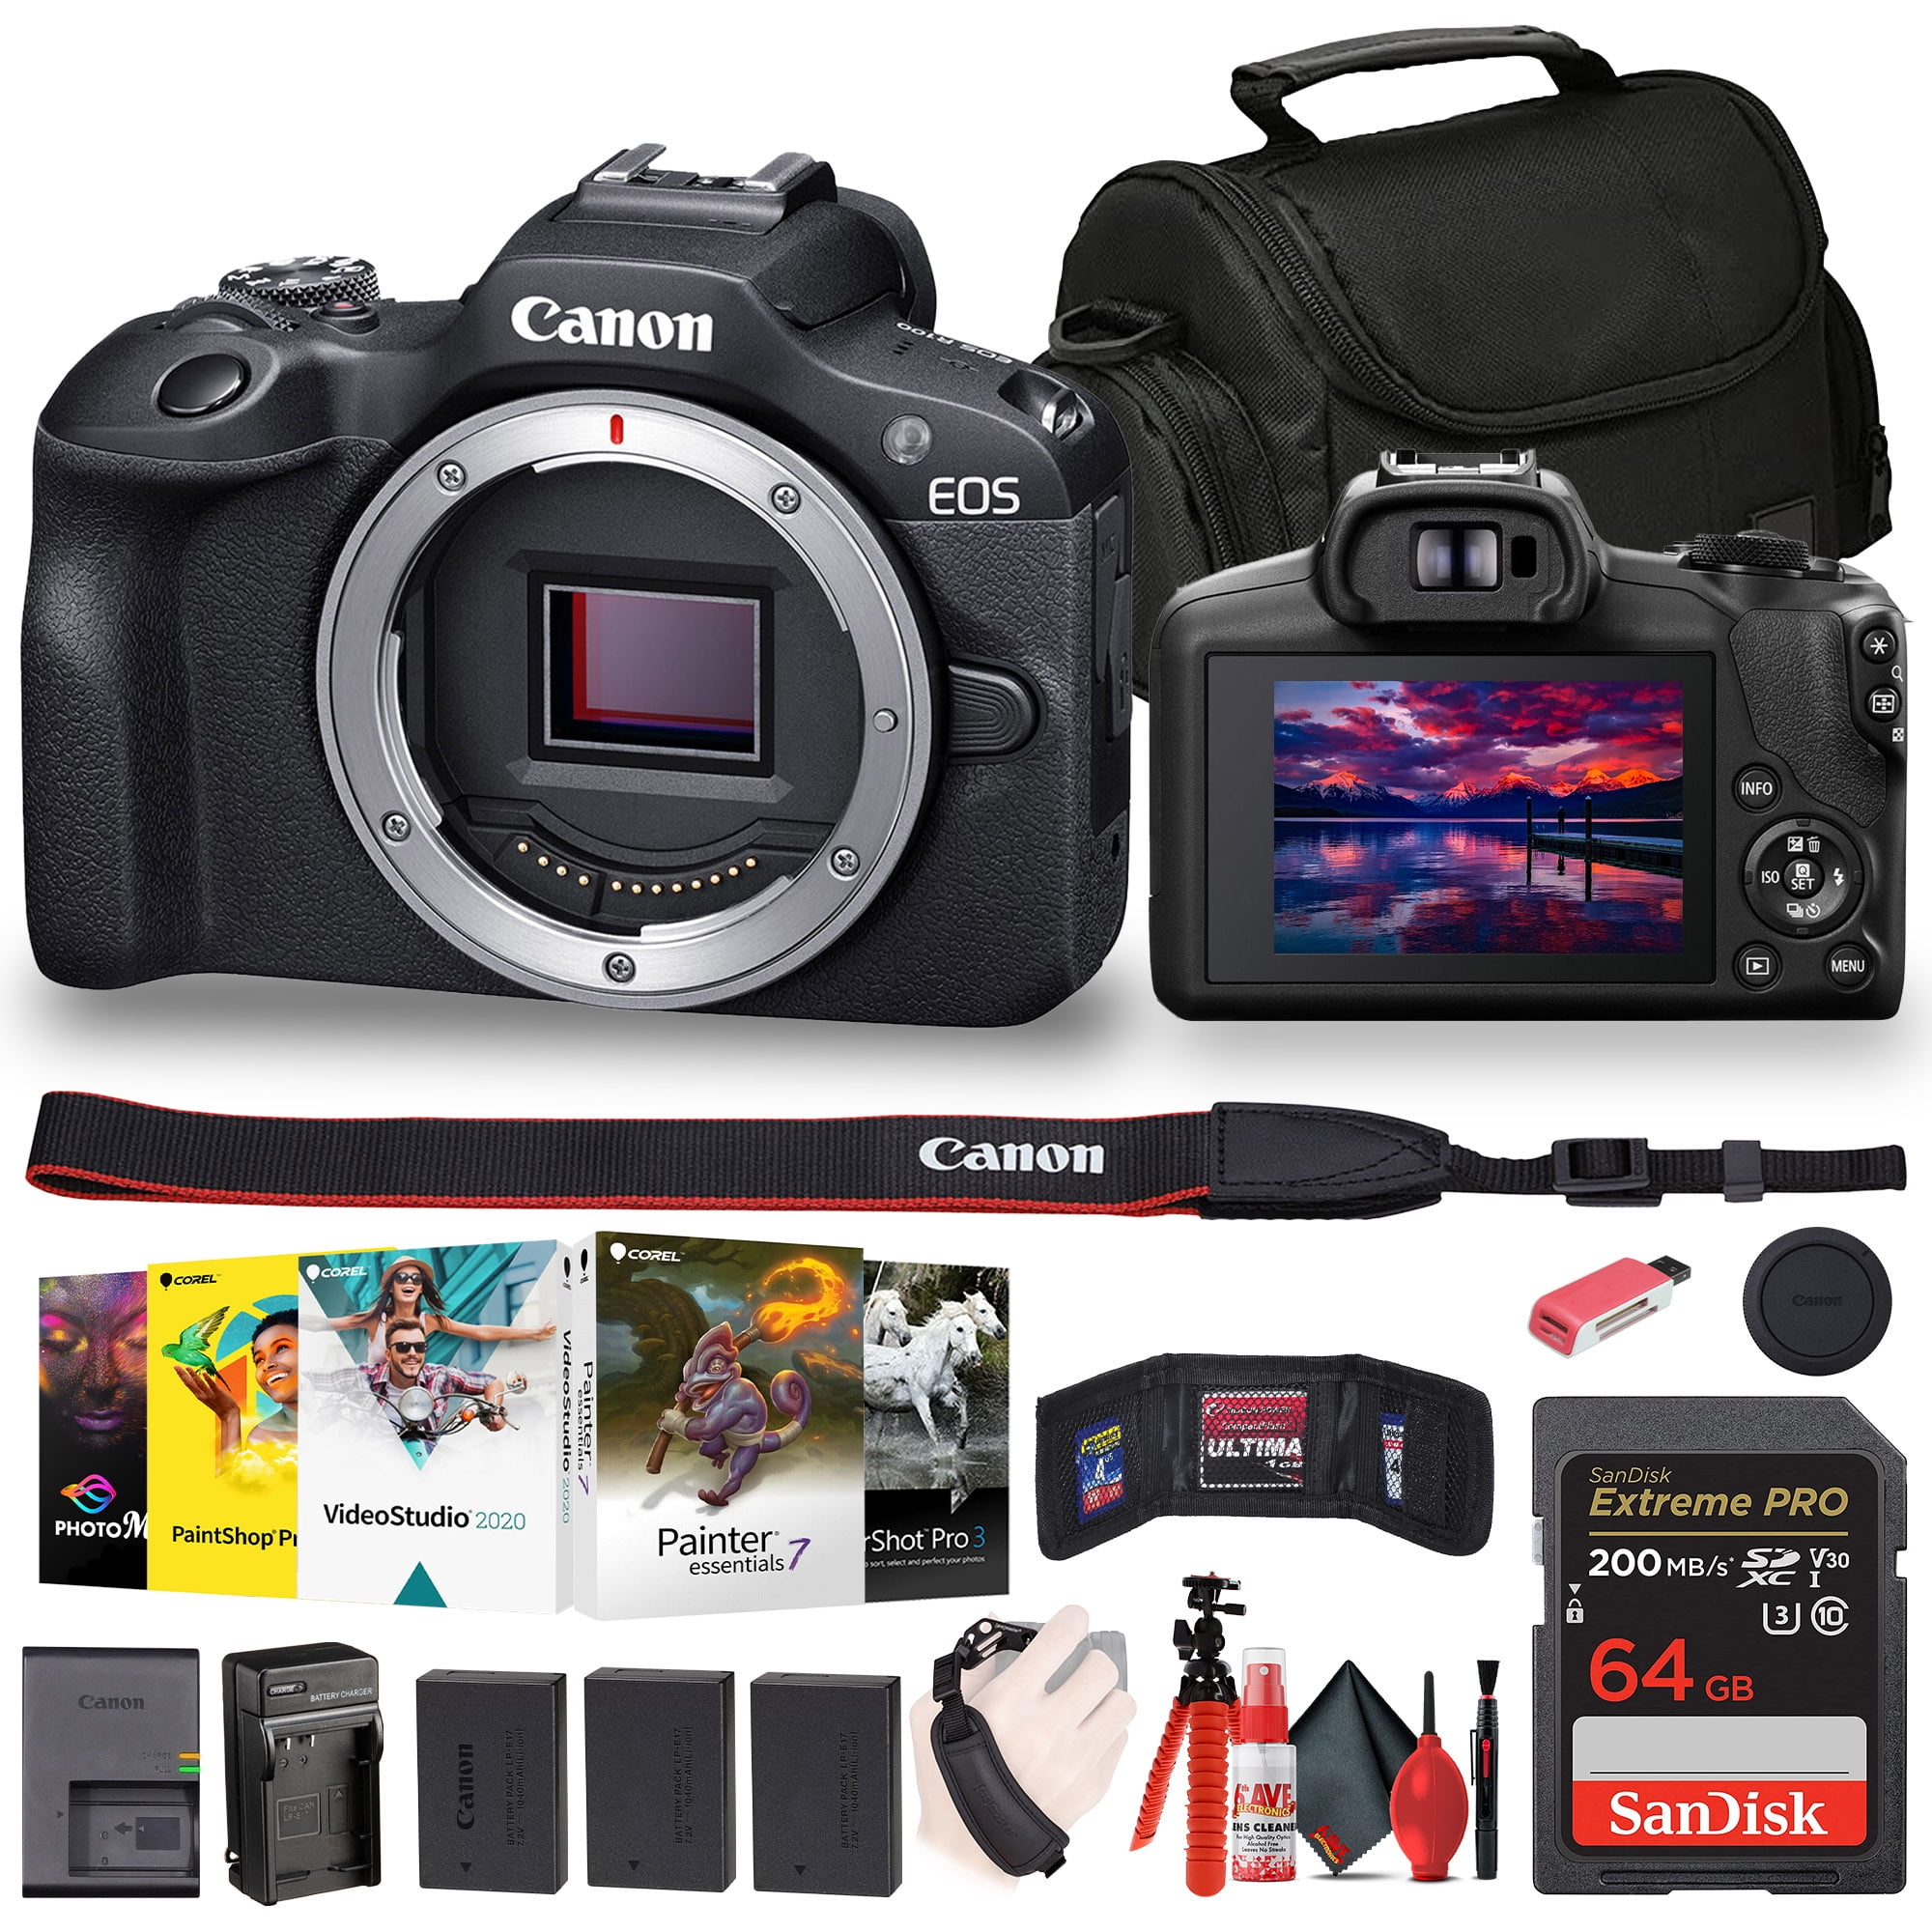  Canon EOS R6 Mirrorless Digital Camera with 24-105mm f/4-7.1  Lens Bundle + 75-300mm F/4-5.6 III Lens + 128GB Memory + Case + Filters +  Tripod (26pc Bundle) : Electronics